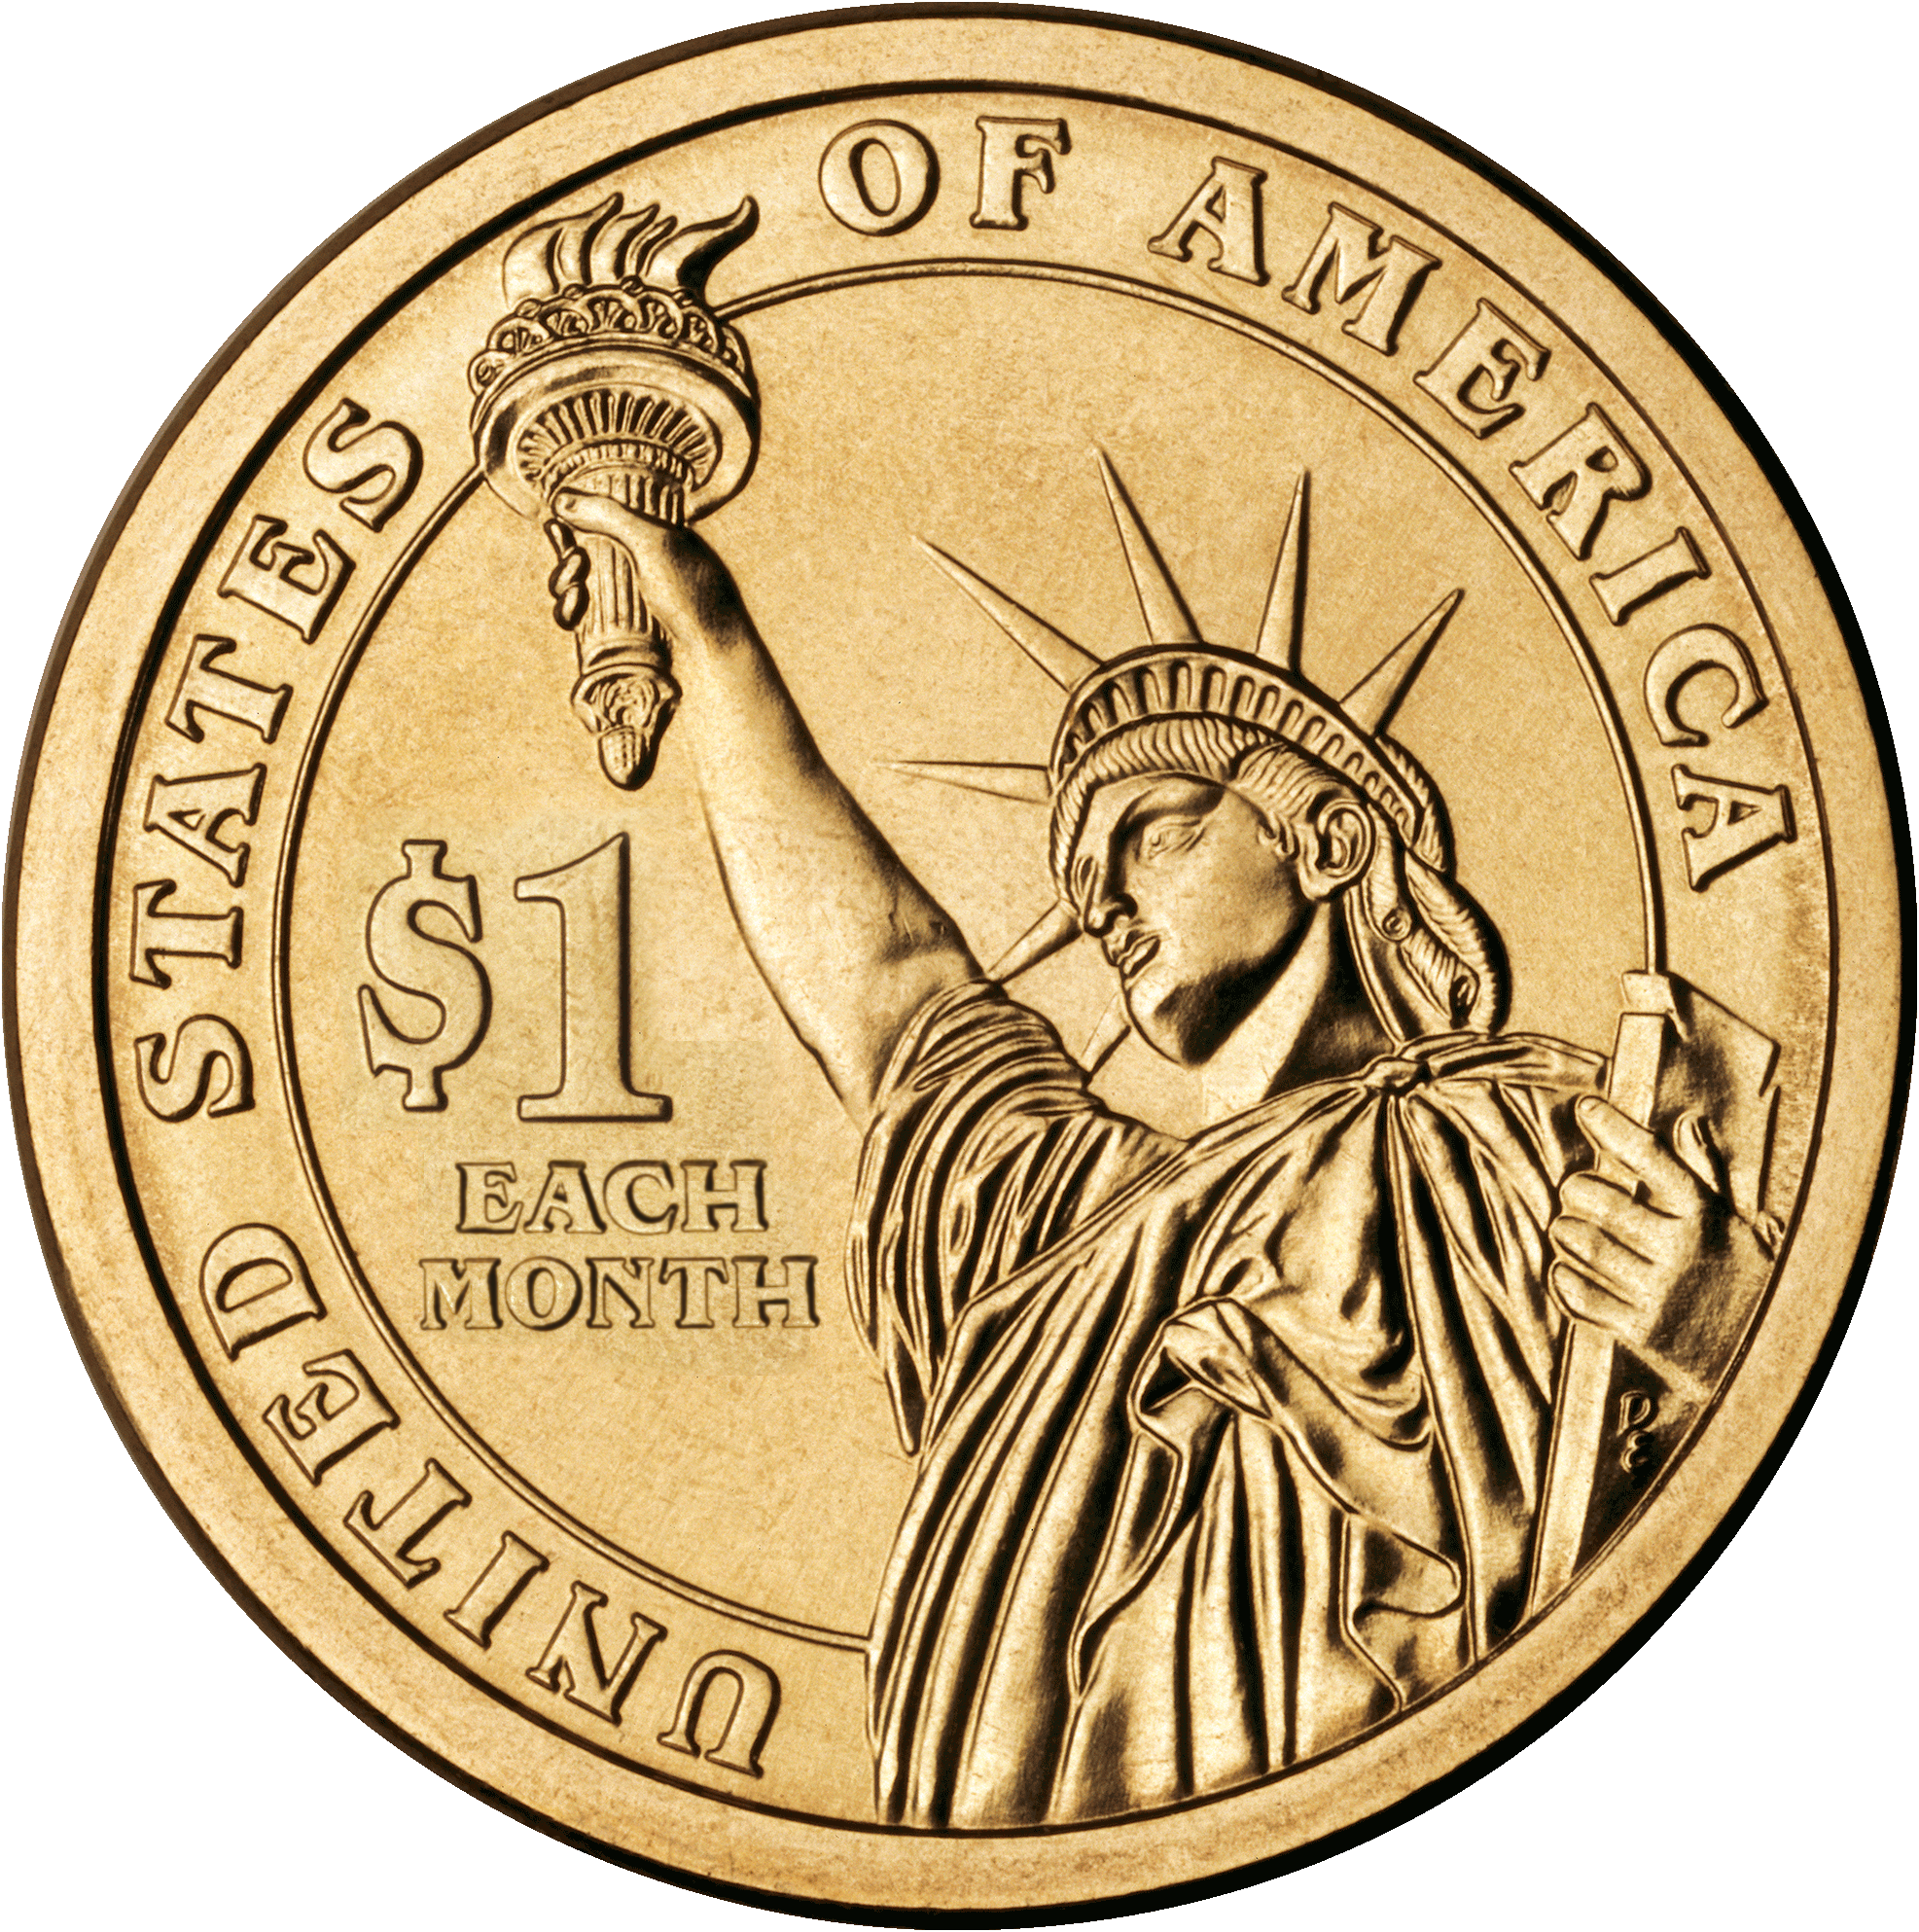 gold coin PNG image - Coin HD